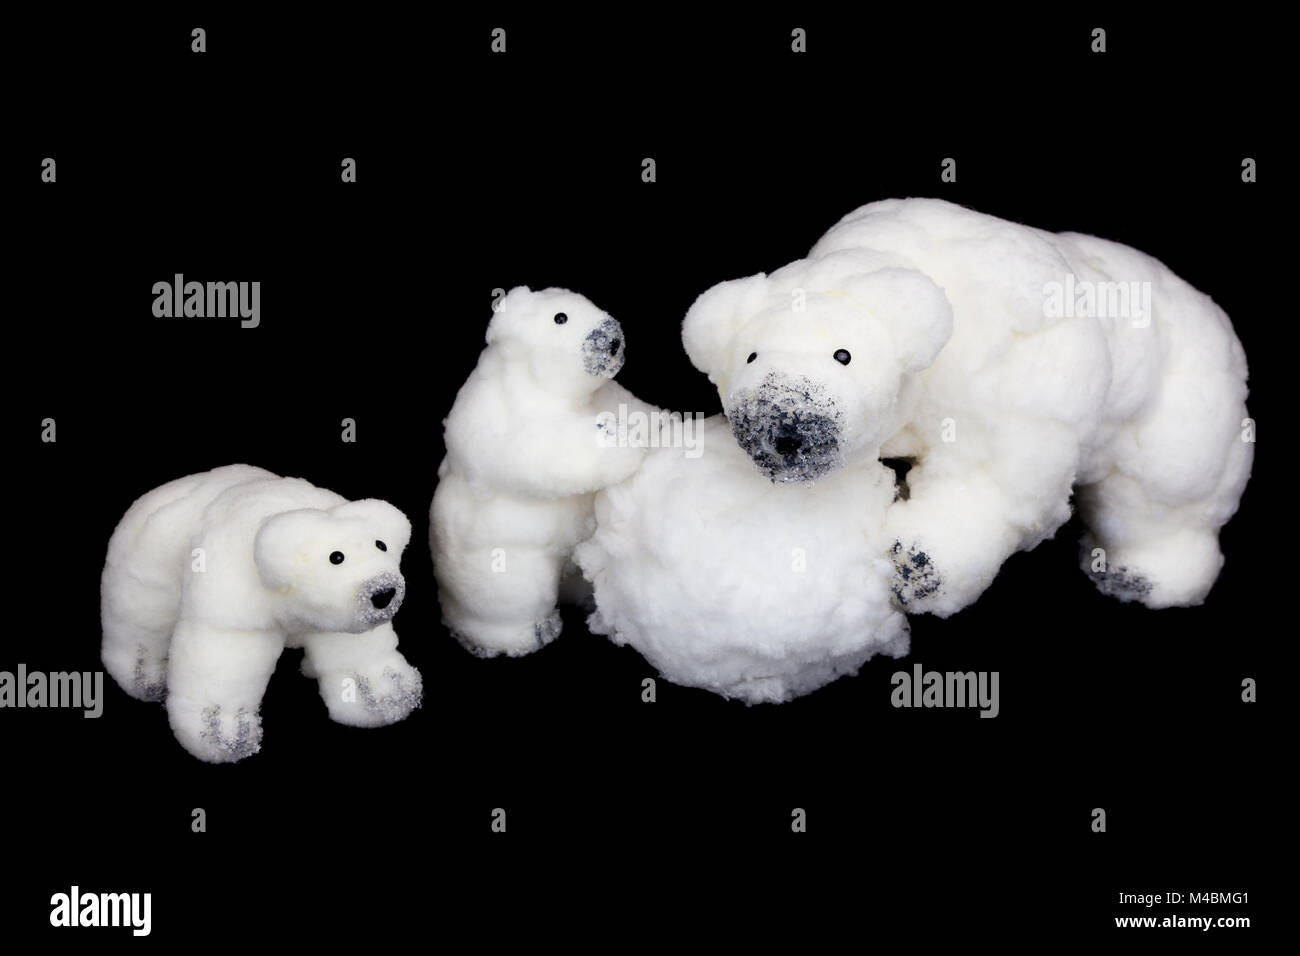 Polar bears family figurines playing with snowball Stock Photo